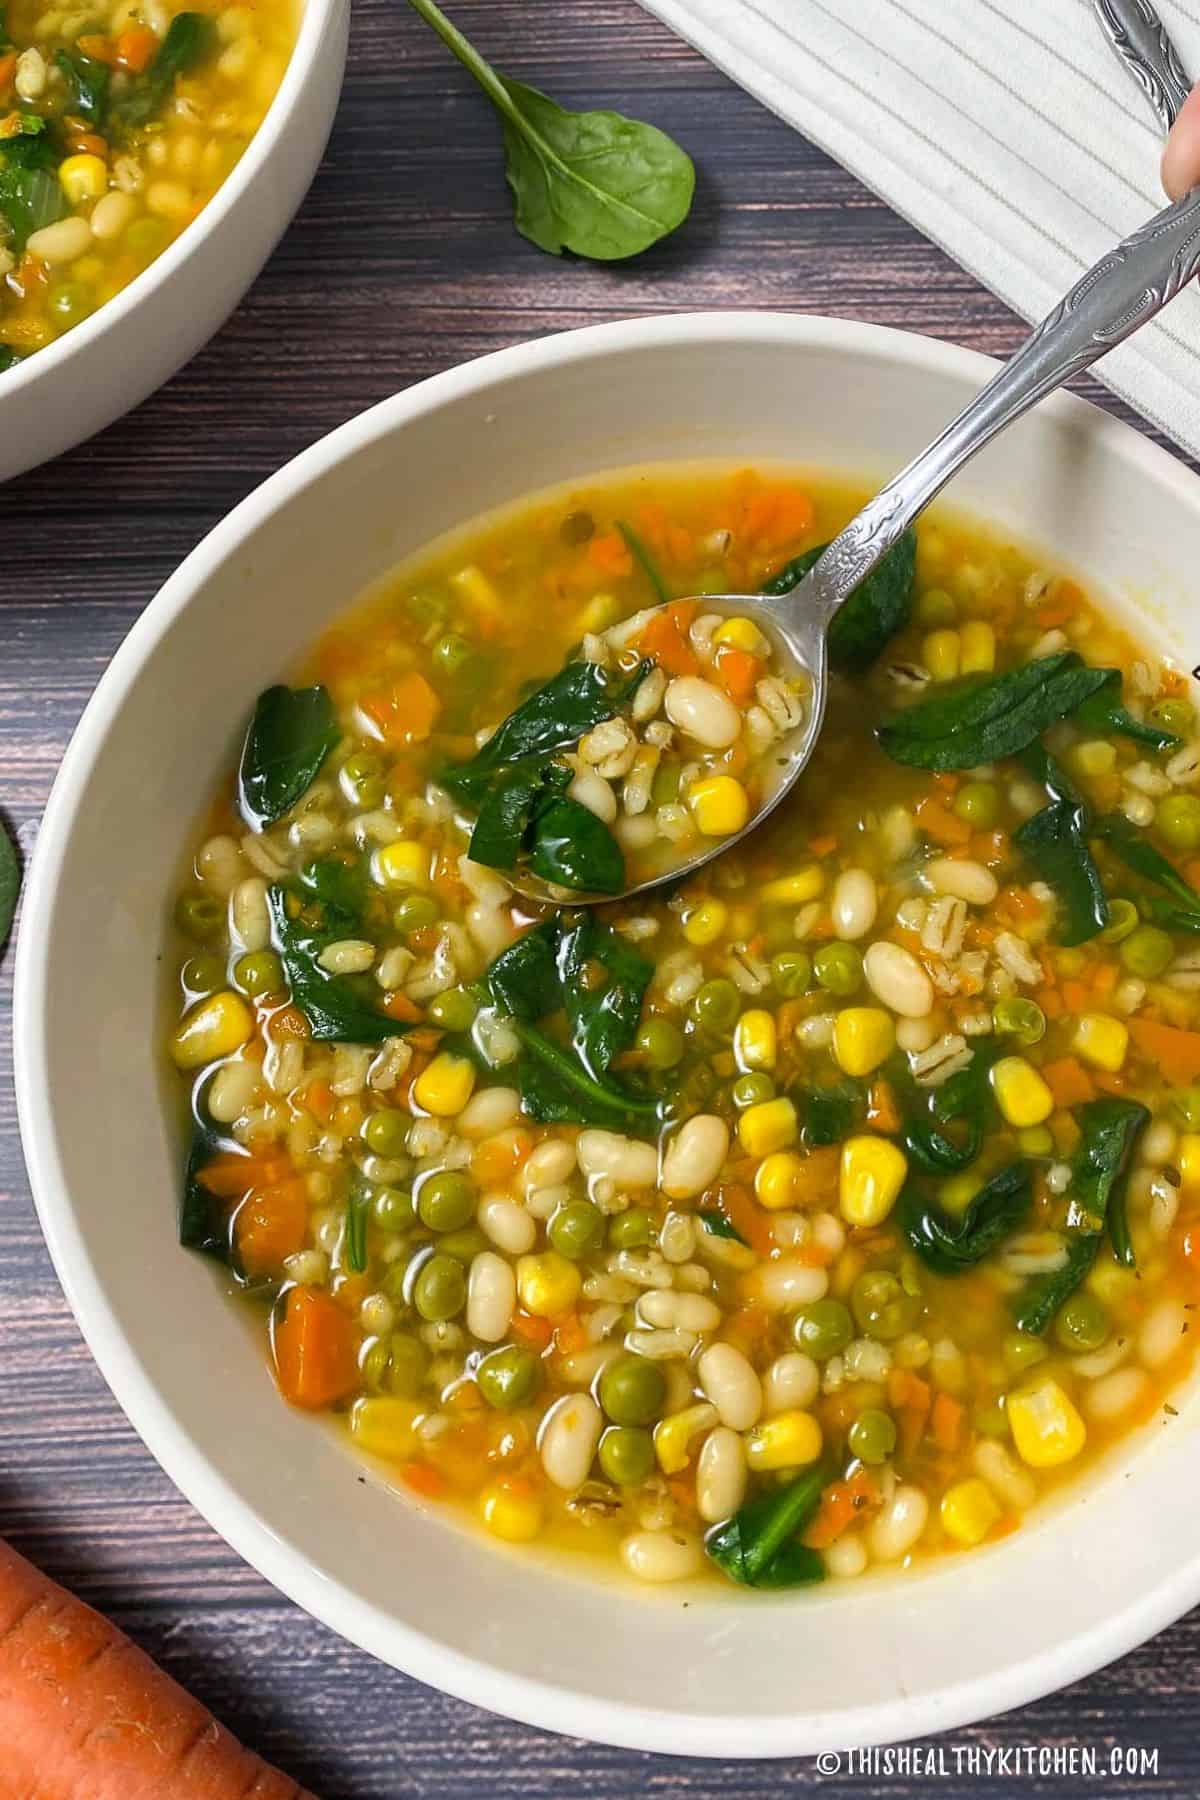 Bowl of soup with barley, beans, vegetables and spinach.